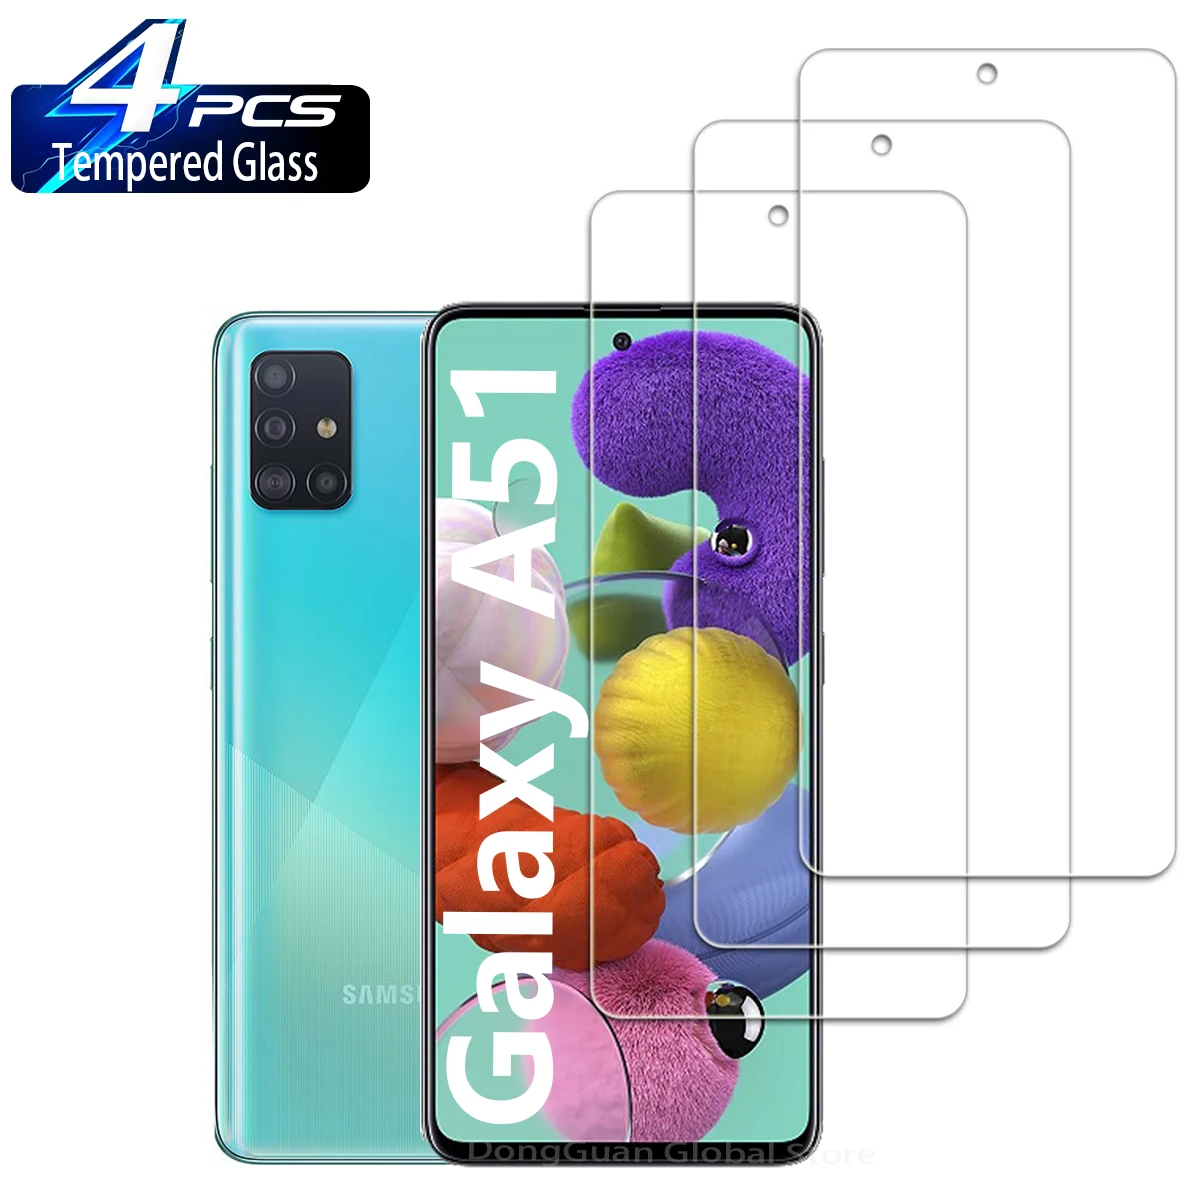 2/4Pcs Tempered Glass For Samsung Galaxy A51 Screen Protector Glass Film 2 in 1 tempered glass for samsung galaxy a51 a71 a50 camera lens film screen protector protective glass on samsung a51 a71 glass